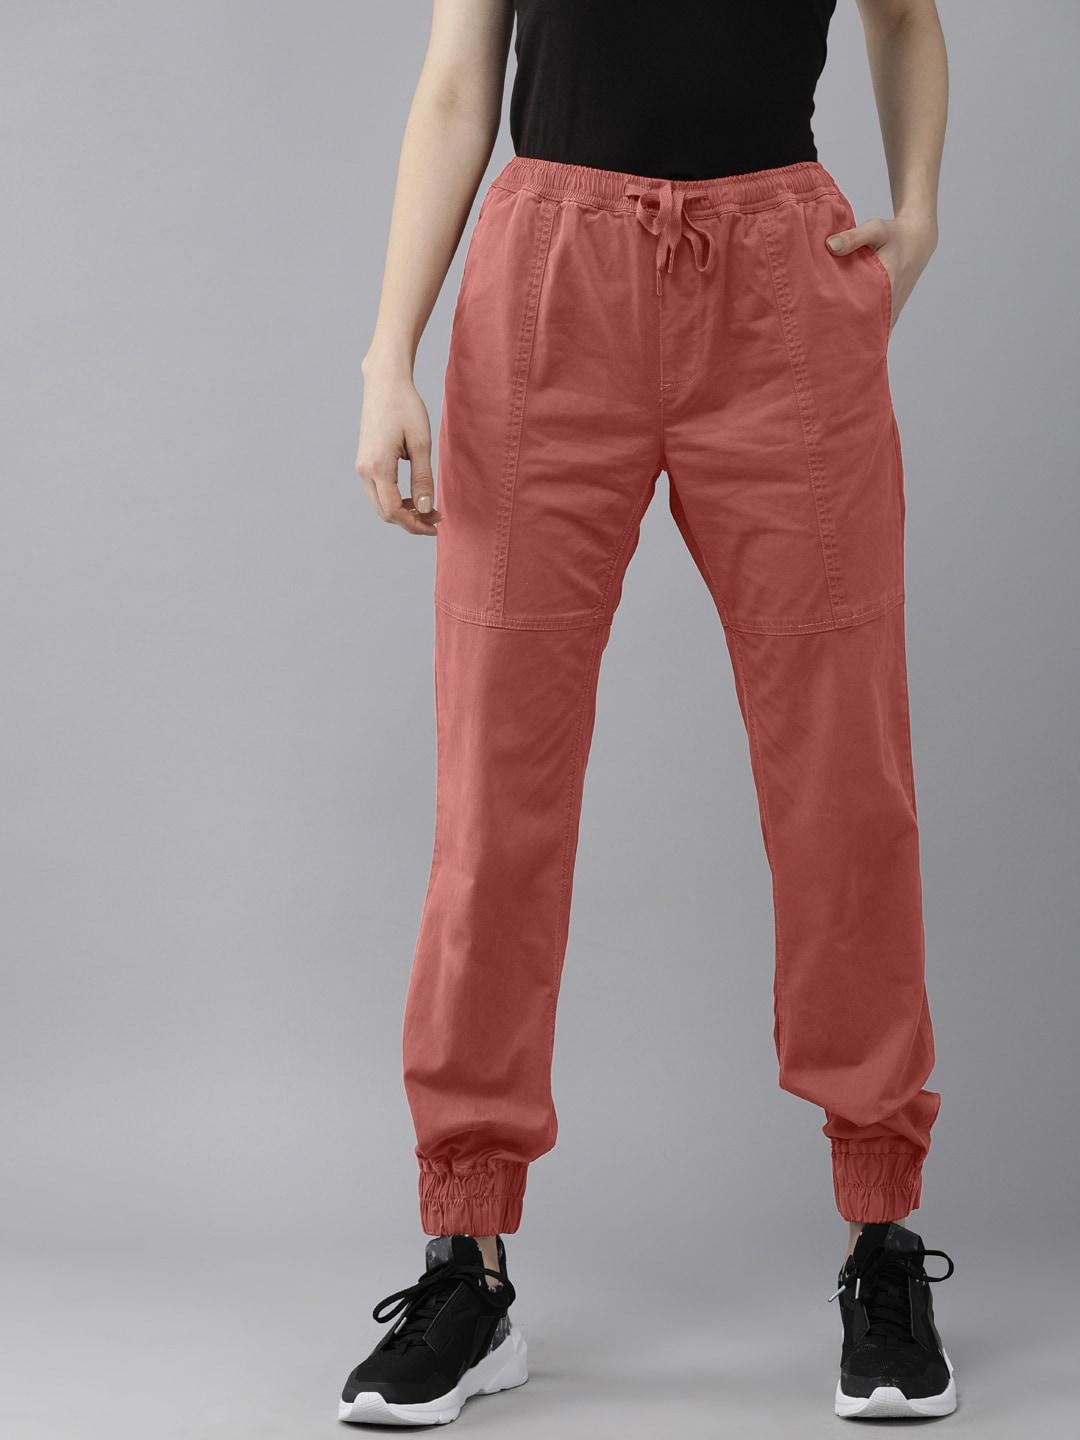 the roadster lifestyle co women red solid high-rise joggers